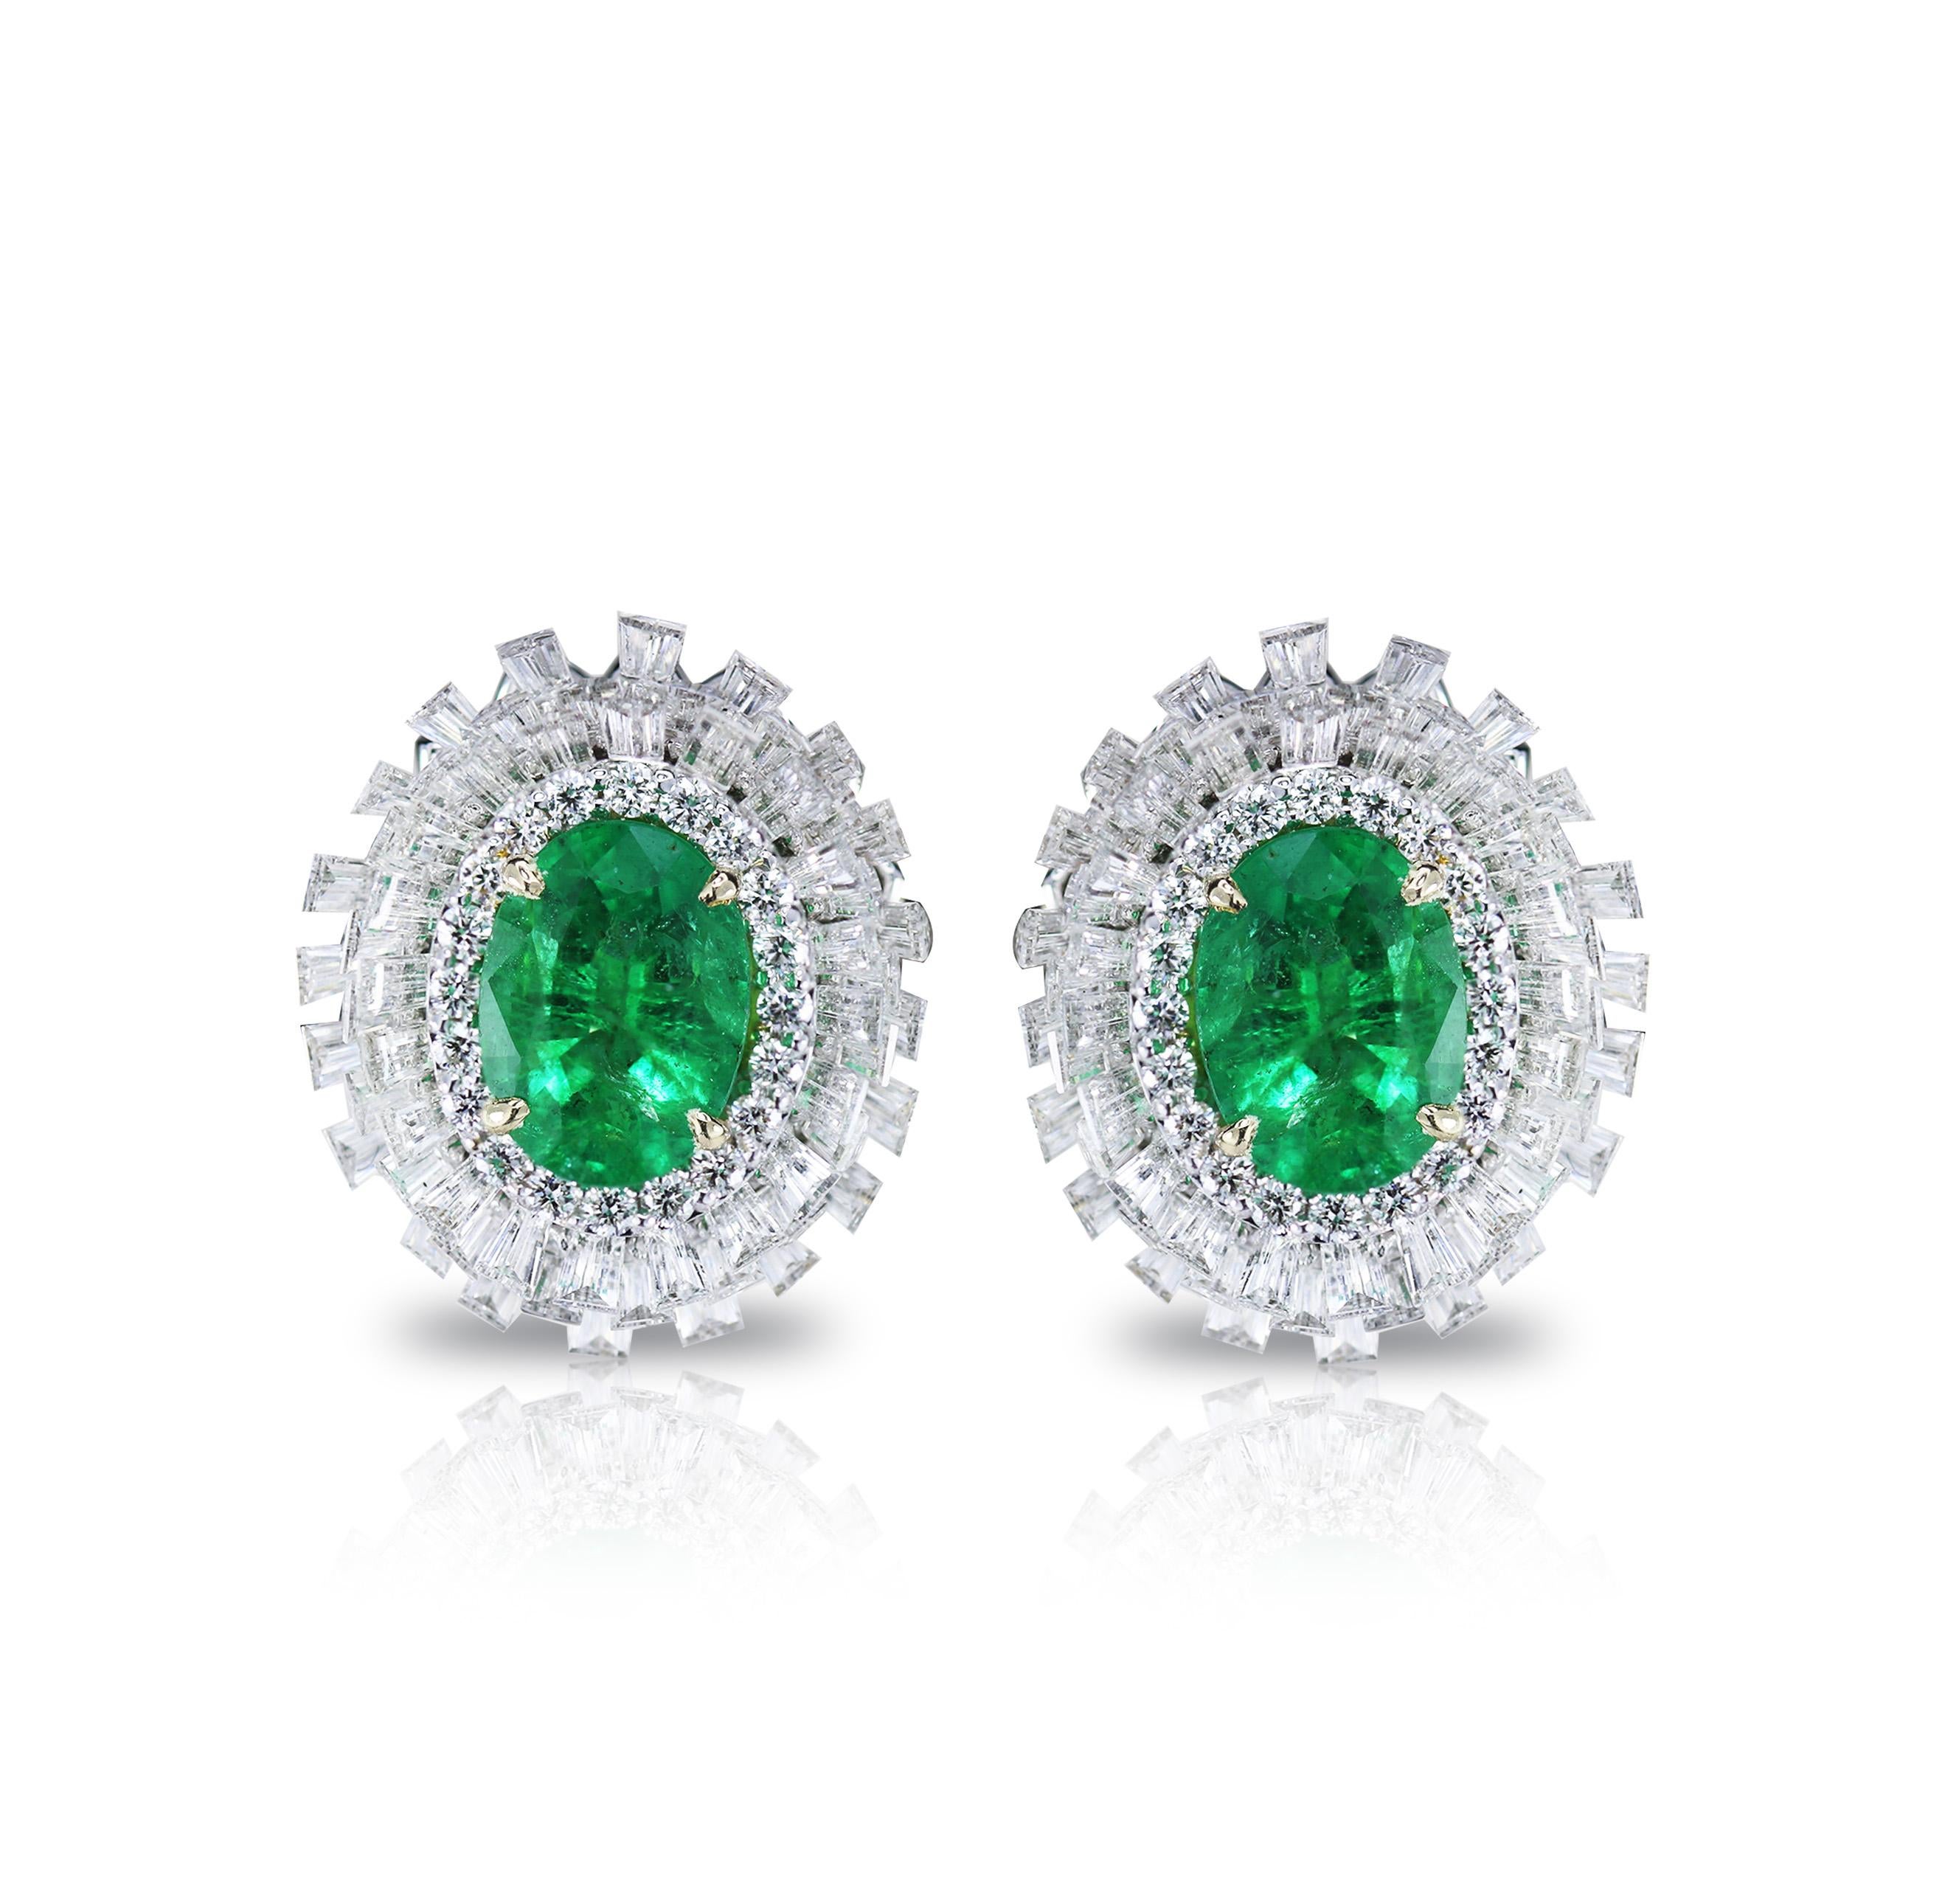 Diamond and Emerald Stud Earrings

A piece of jewellery that brightens up a room with its sparkle is worth owning. This 18K white gold stud earrings studded generously with round and baguettes brilliant cut diamonds and a showstopping emerald is a